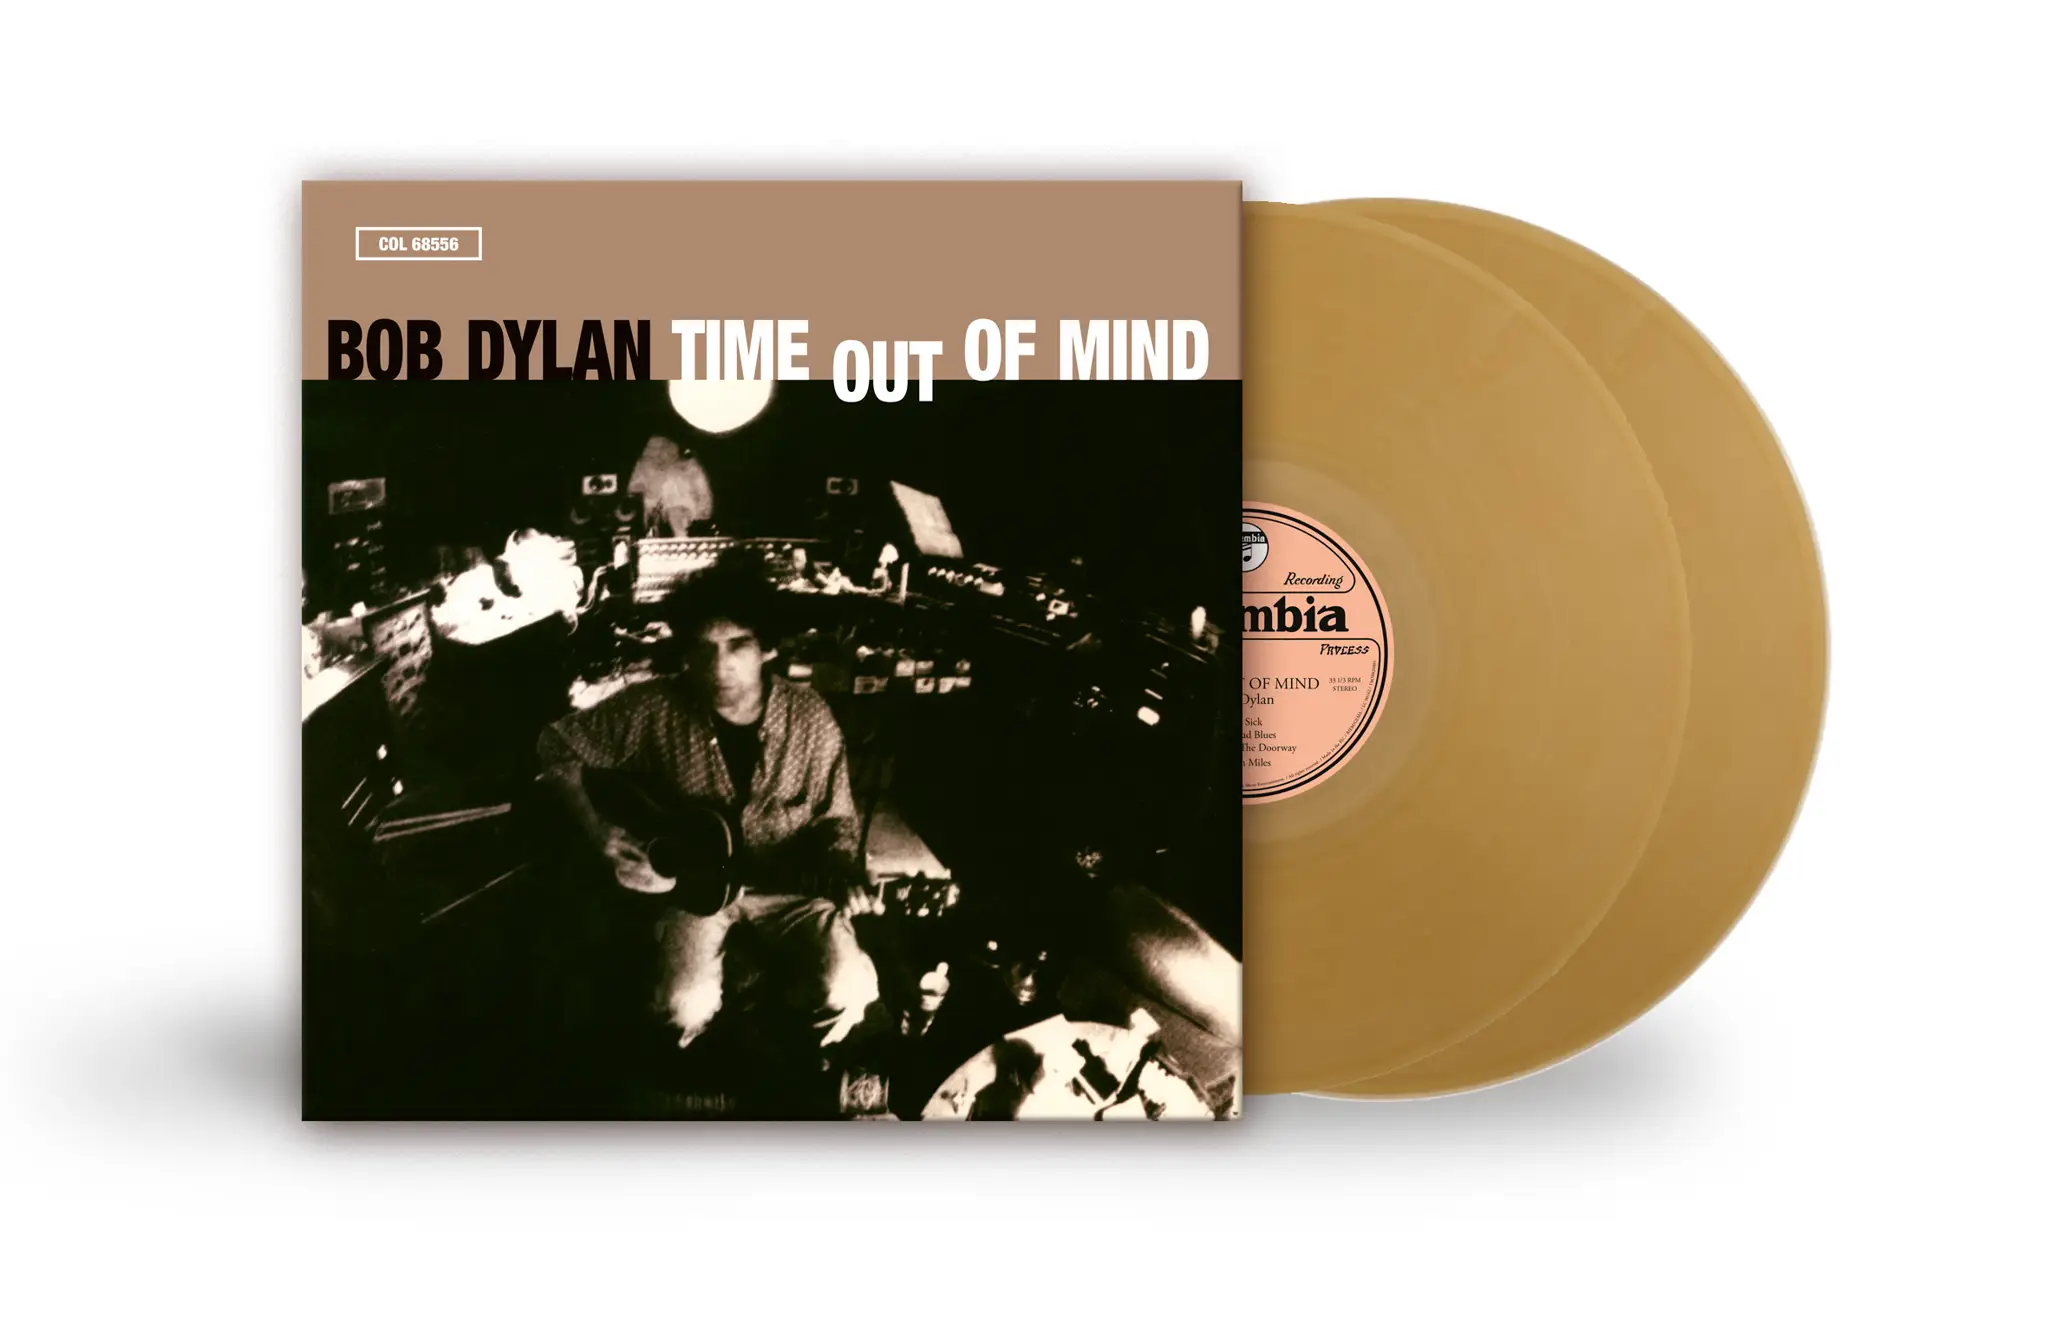 Bob Dylan | Gold 2xVinyl LP | Time Out Of Mind (National Album